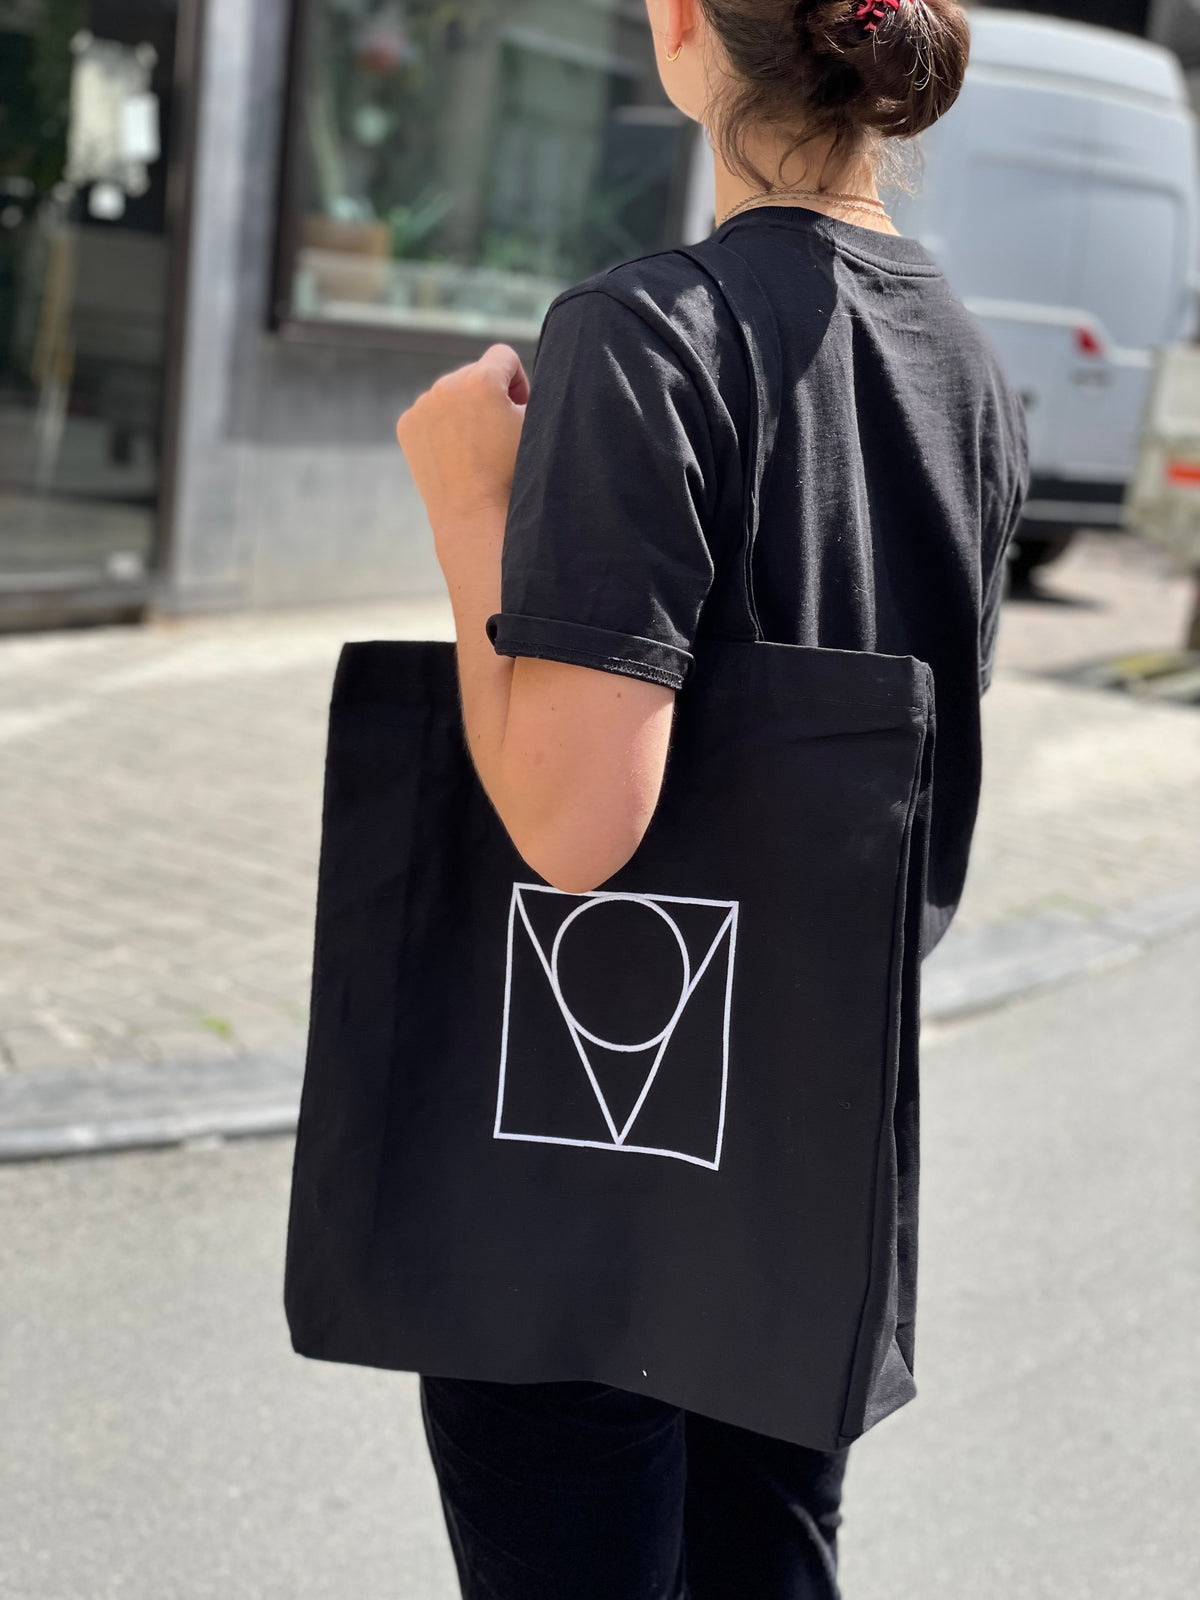 MOK Tote embroidered